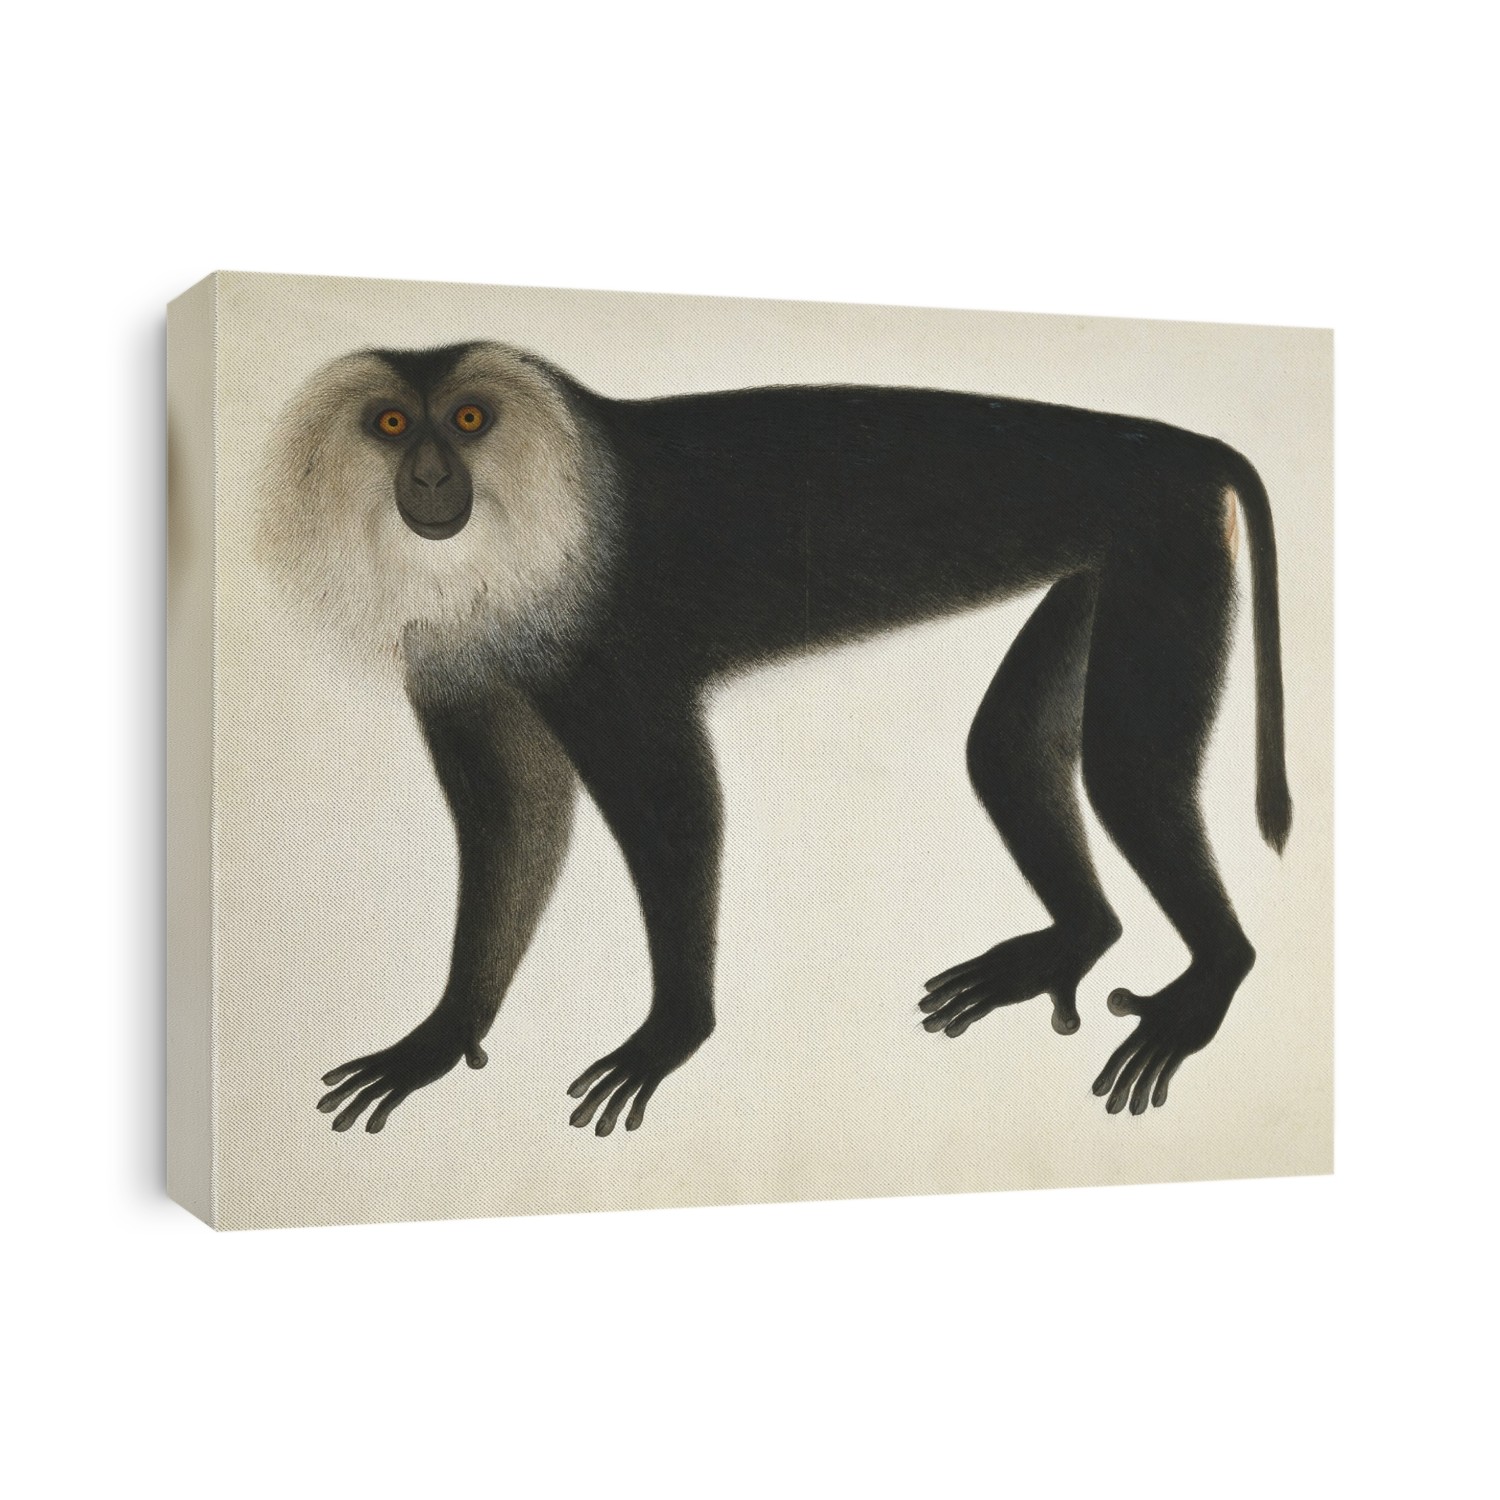 Chinese monkey. Illustration from the John Reeves Collection of Zoological Drawings from Canton, China.